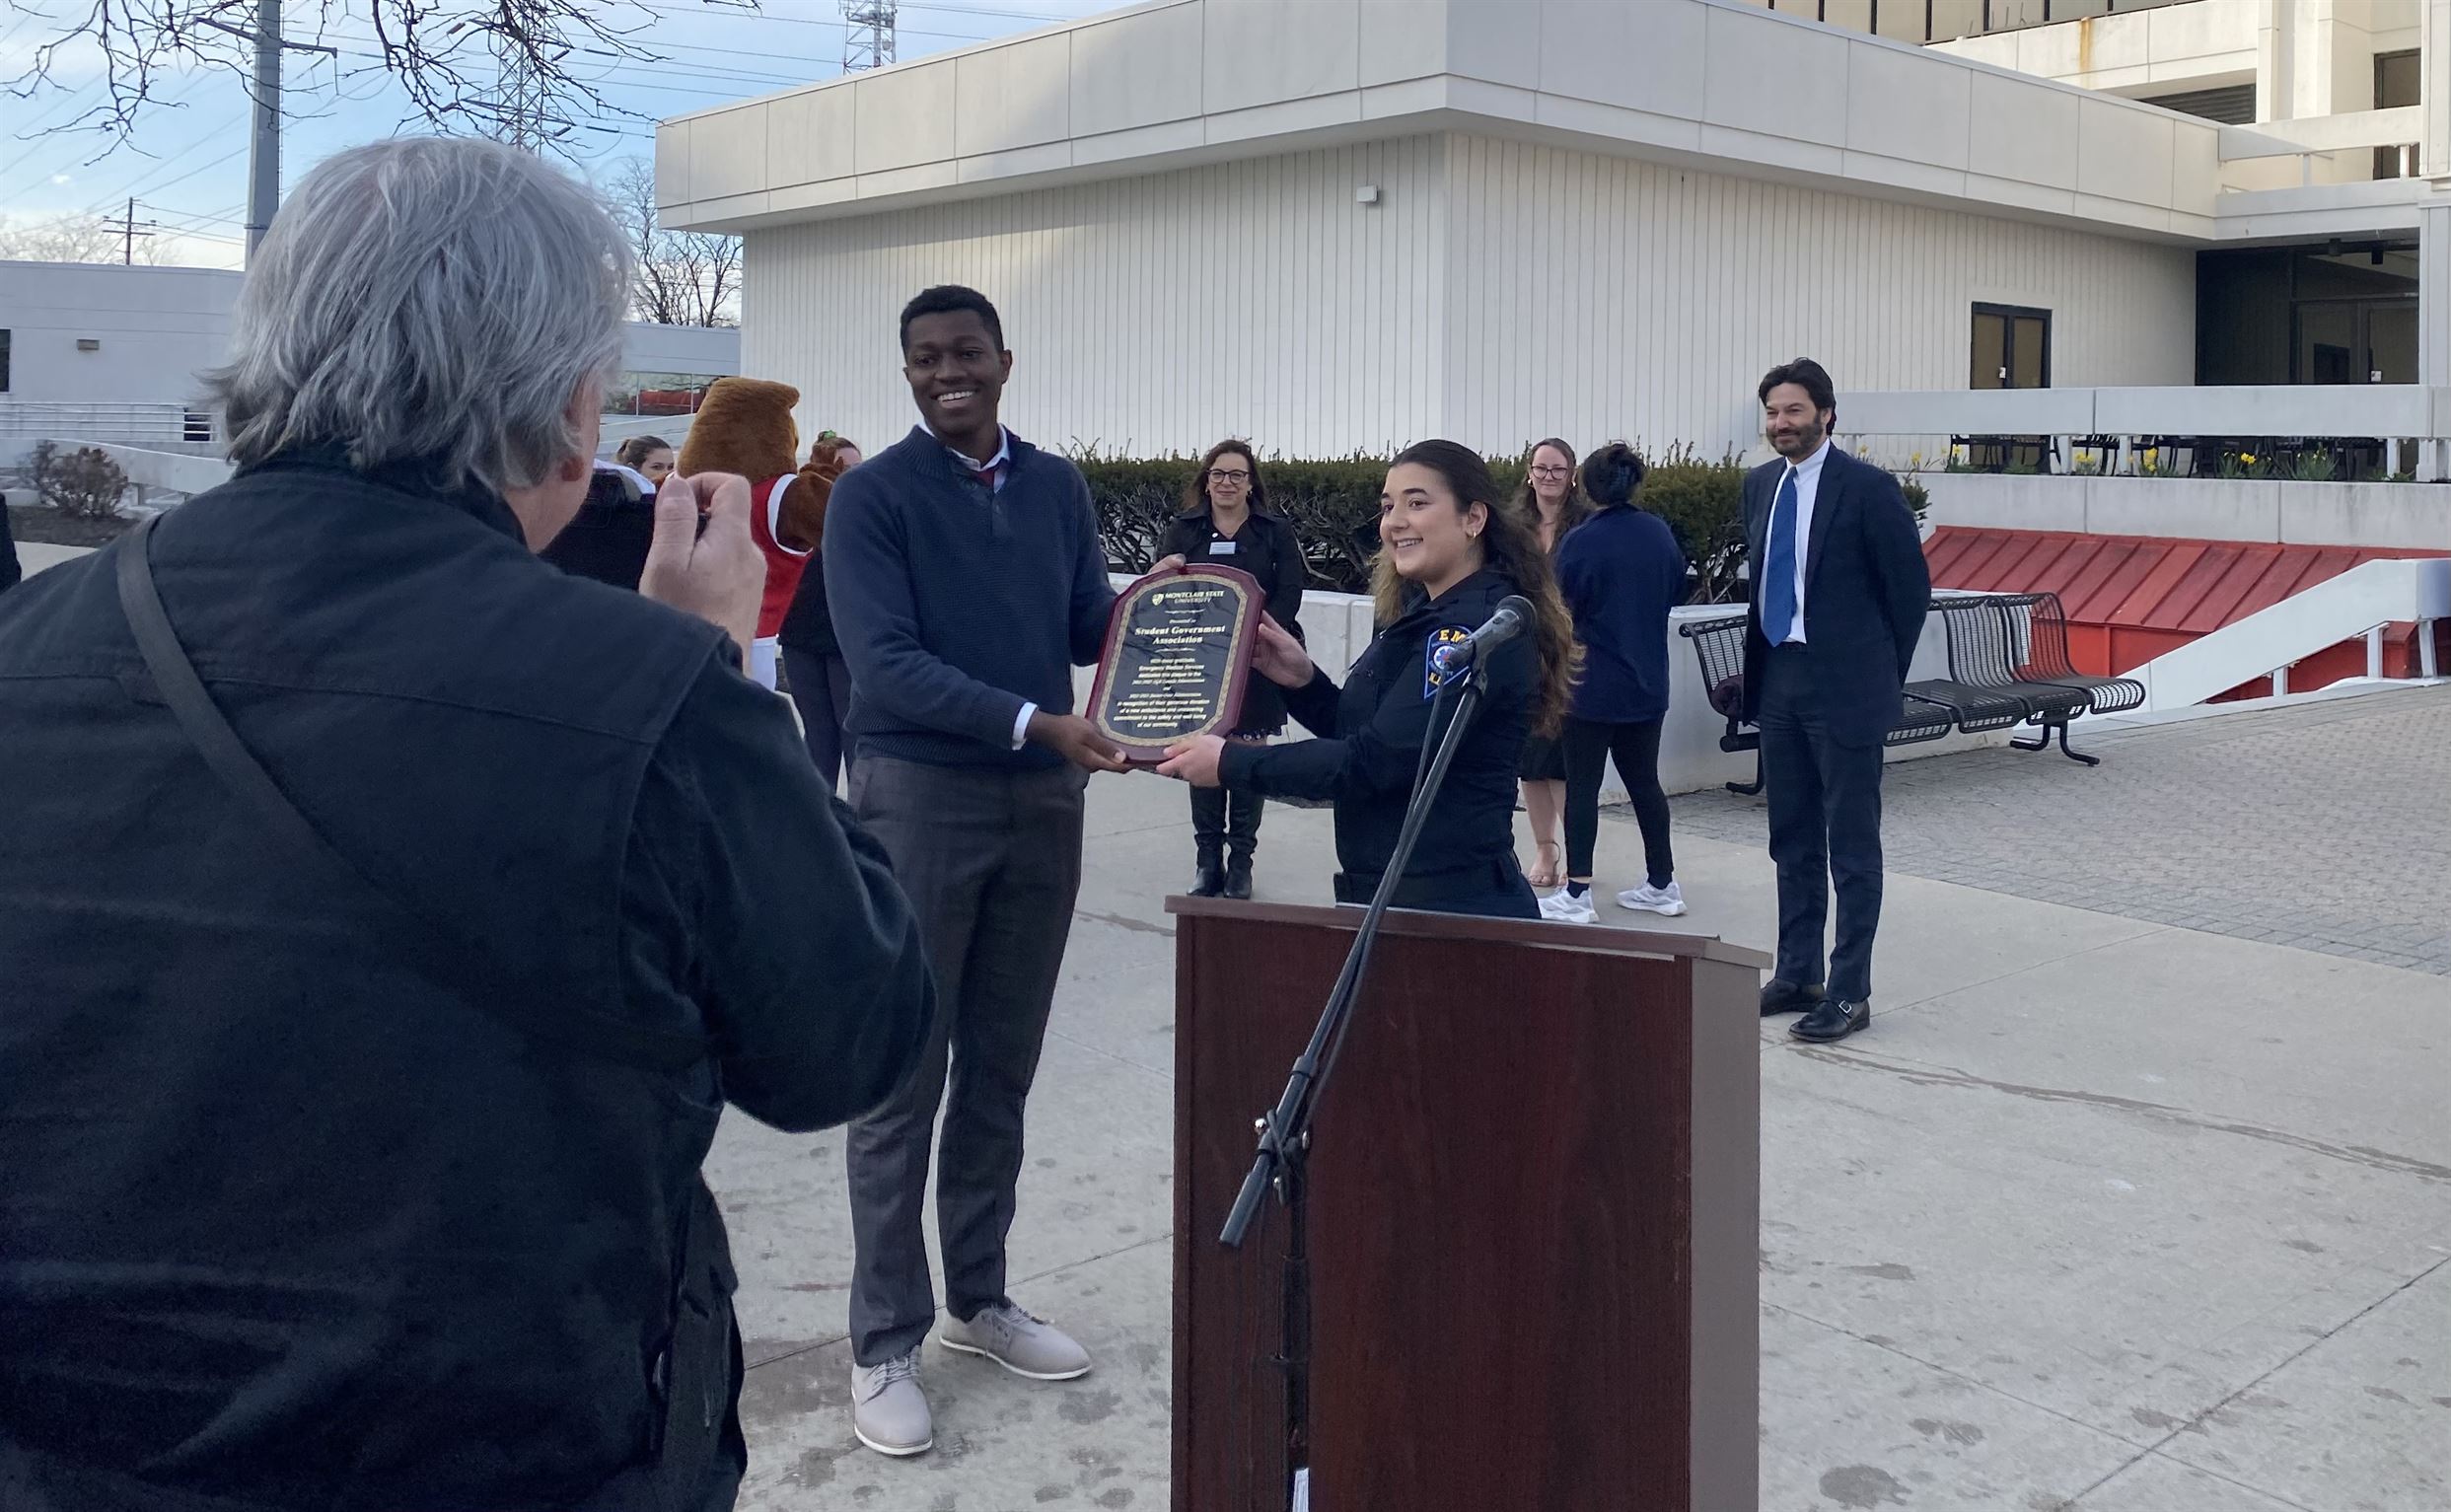 SGA President, Richard Steiner-Otoo, accepts a plaque thanking the SGA for their contribution.